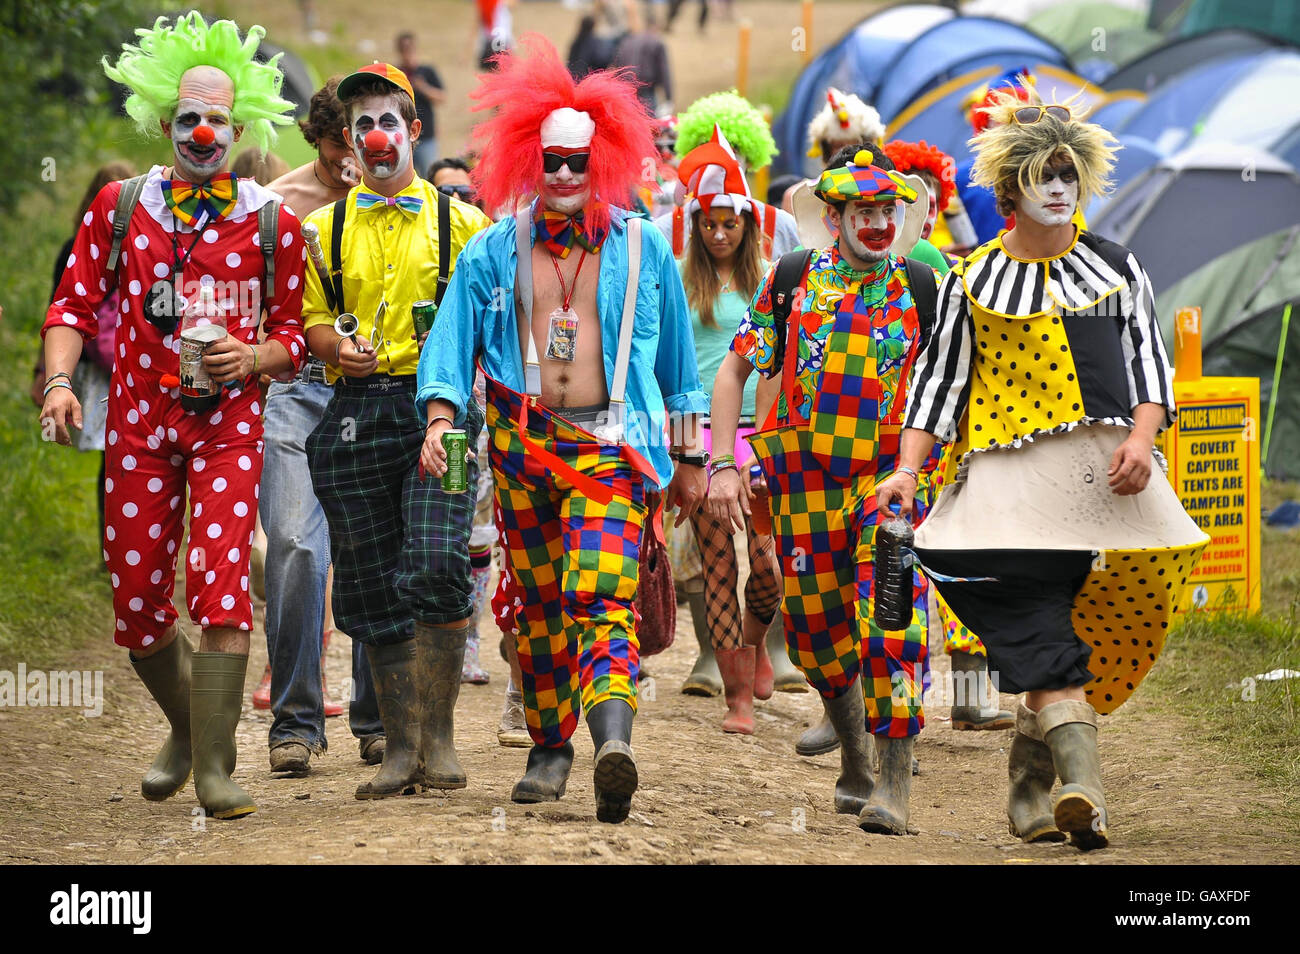 Glastonbury Festival 2008 - Day Two. A group revellers dressed up as colourful clowns during day two of the Glastonbury Festival, Somerset. Stock Photo